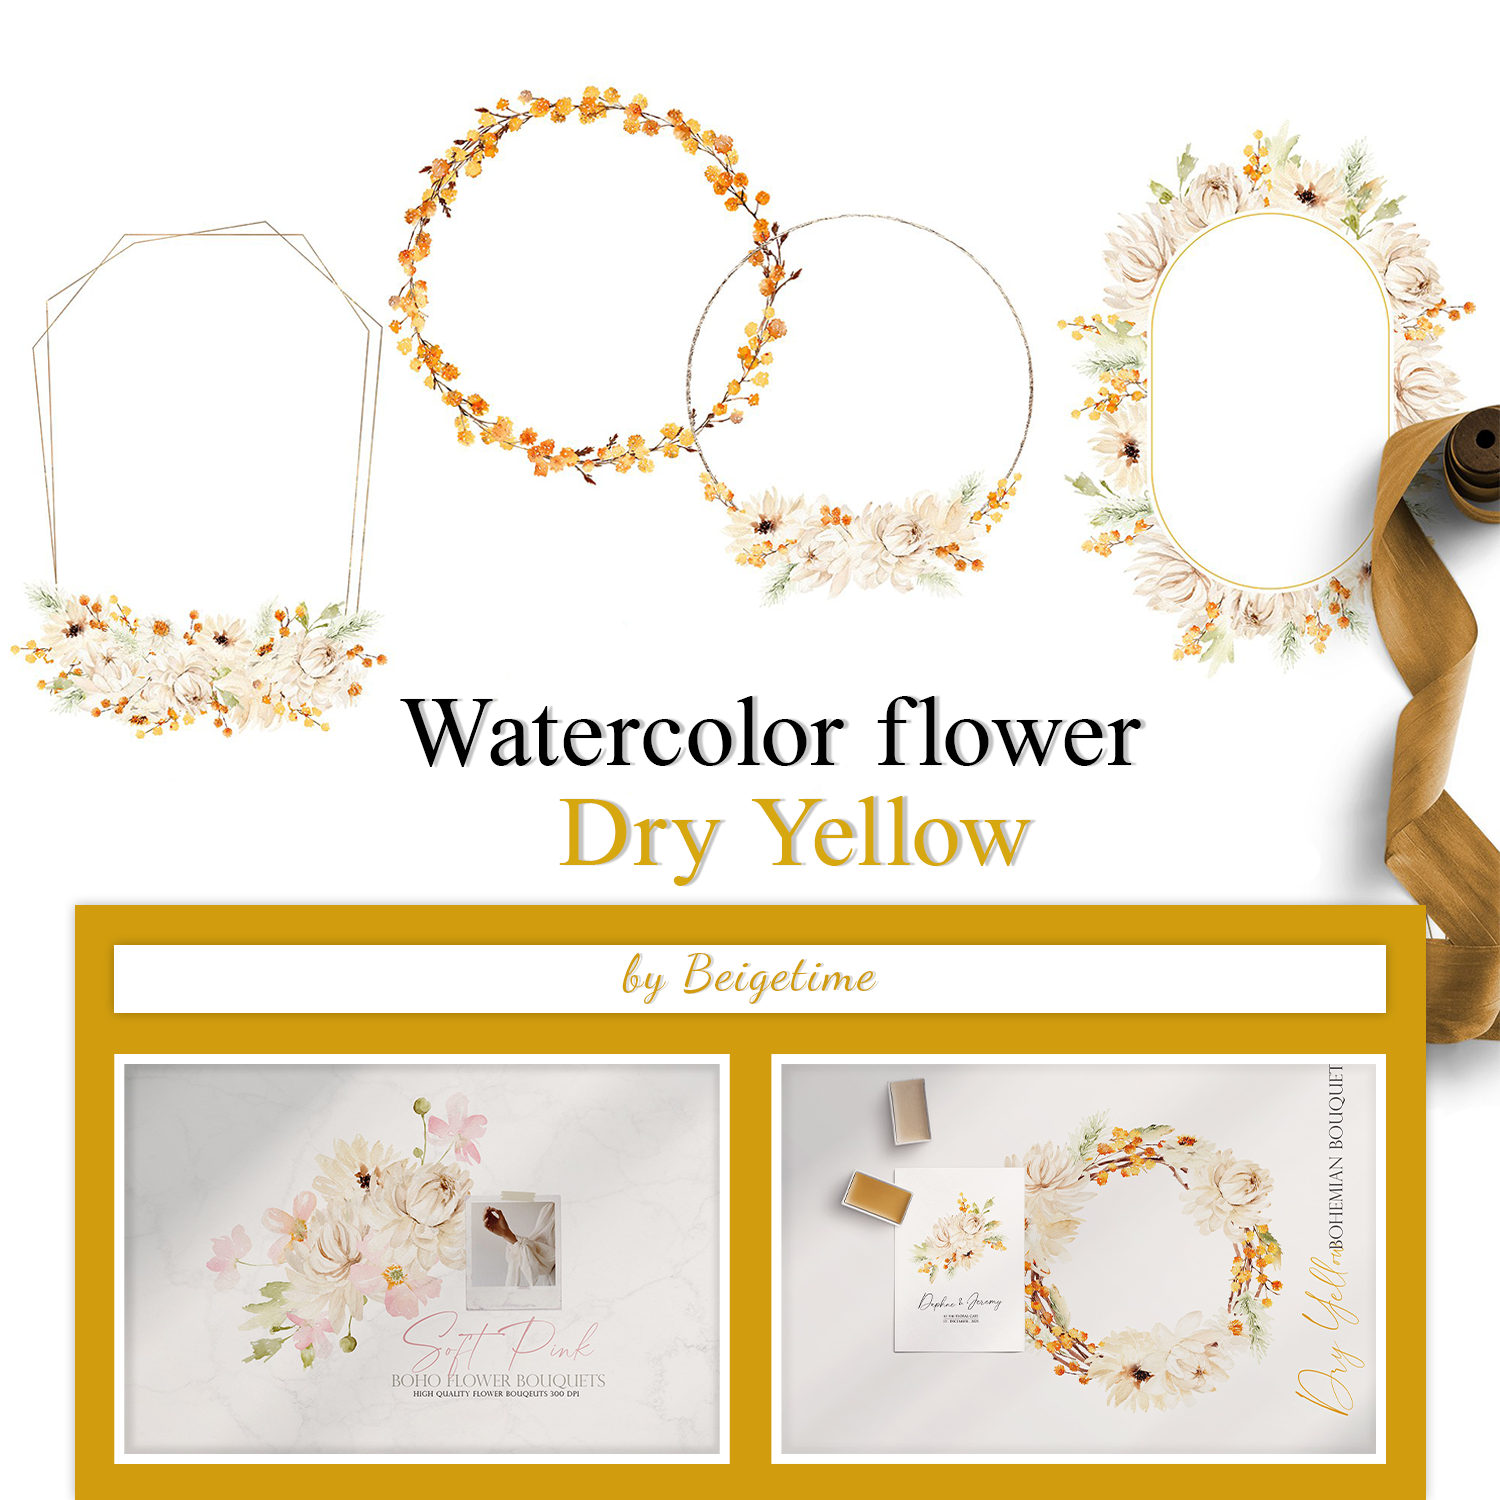 Watercolor flower dry yellow preview.